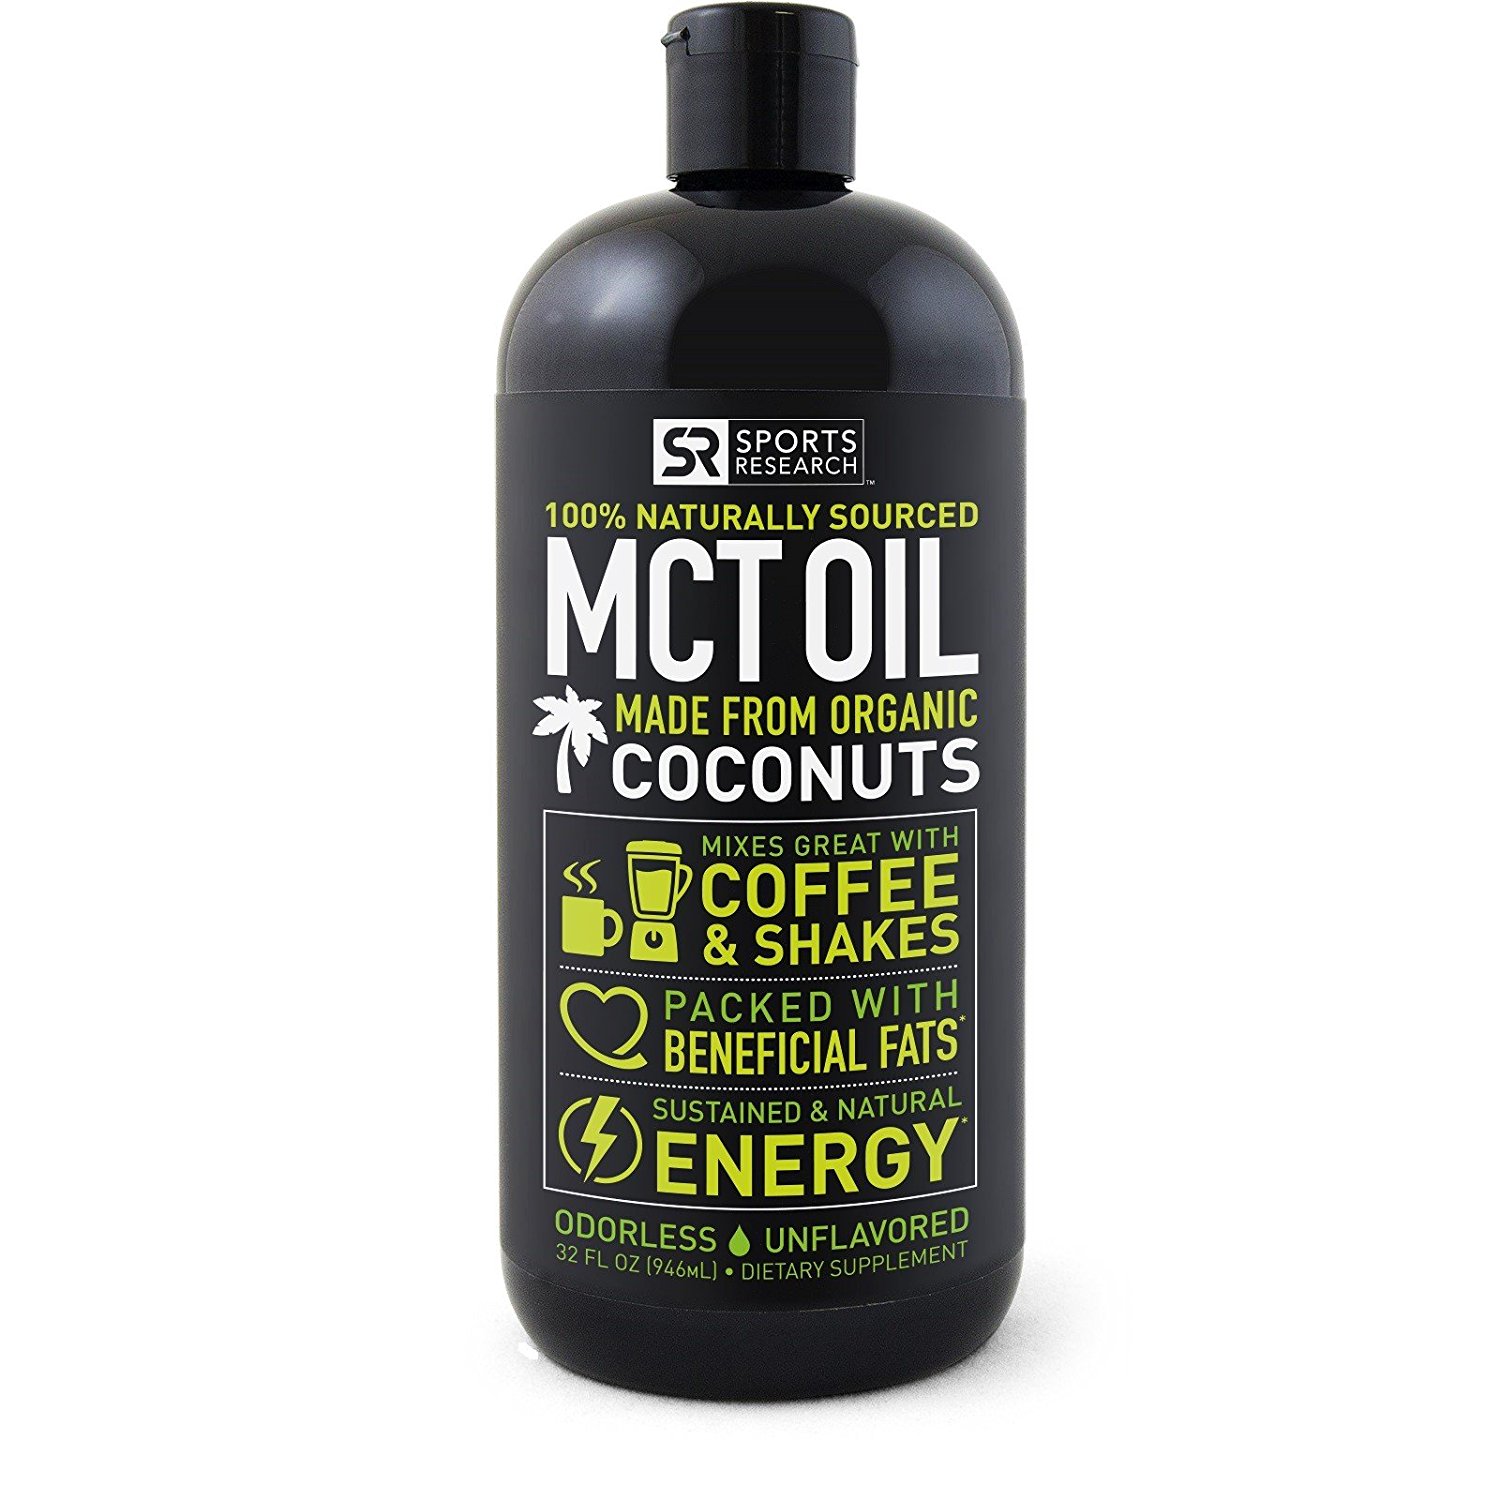 Premium MCT Oil derived only from Organic Coconuts - 32oz BPA free bottle | The only MCT oil certified Paleo Safe and registered by the Vegan Society. Non-GMO and Gluten Free.